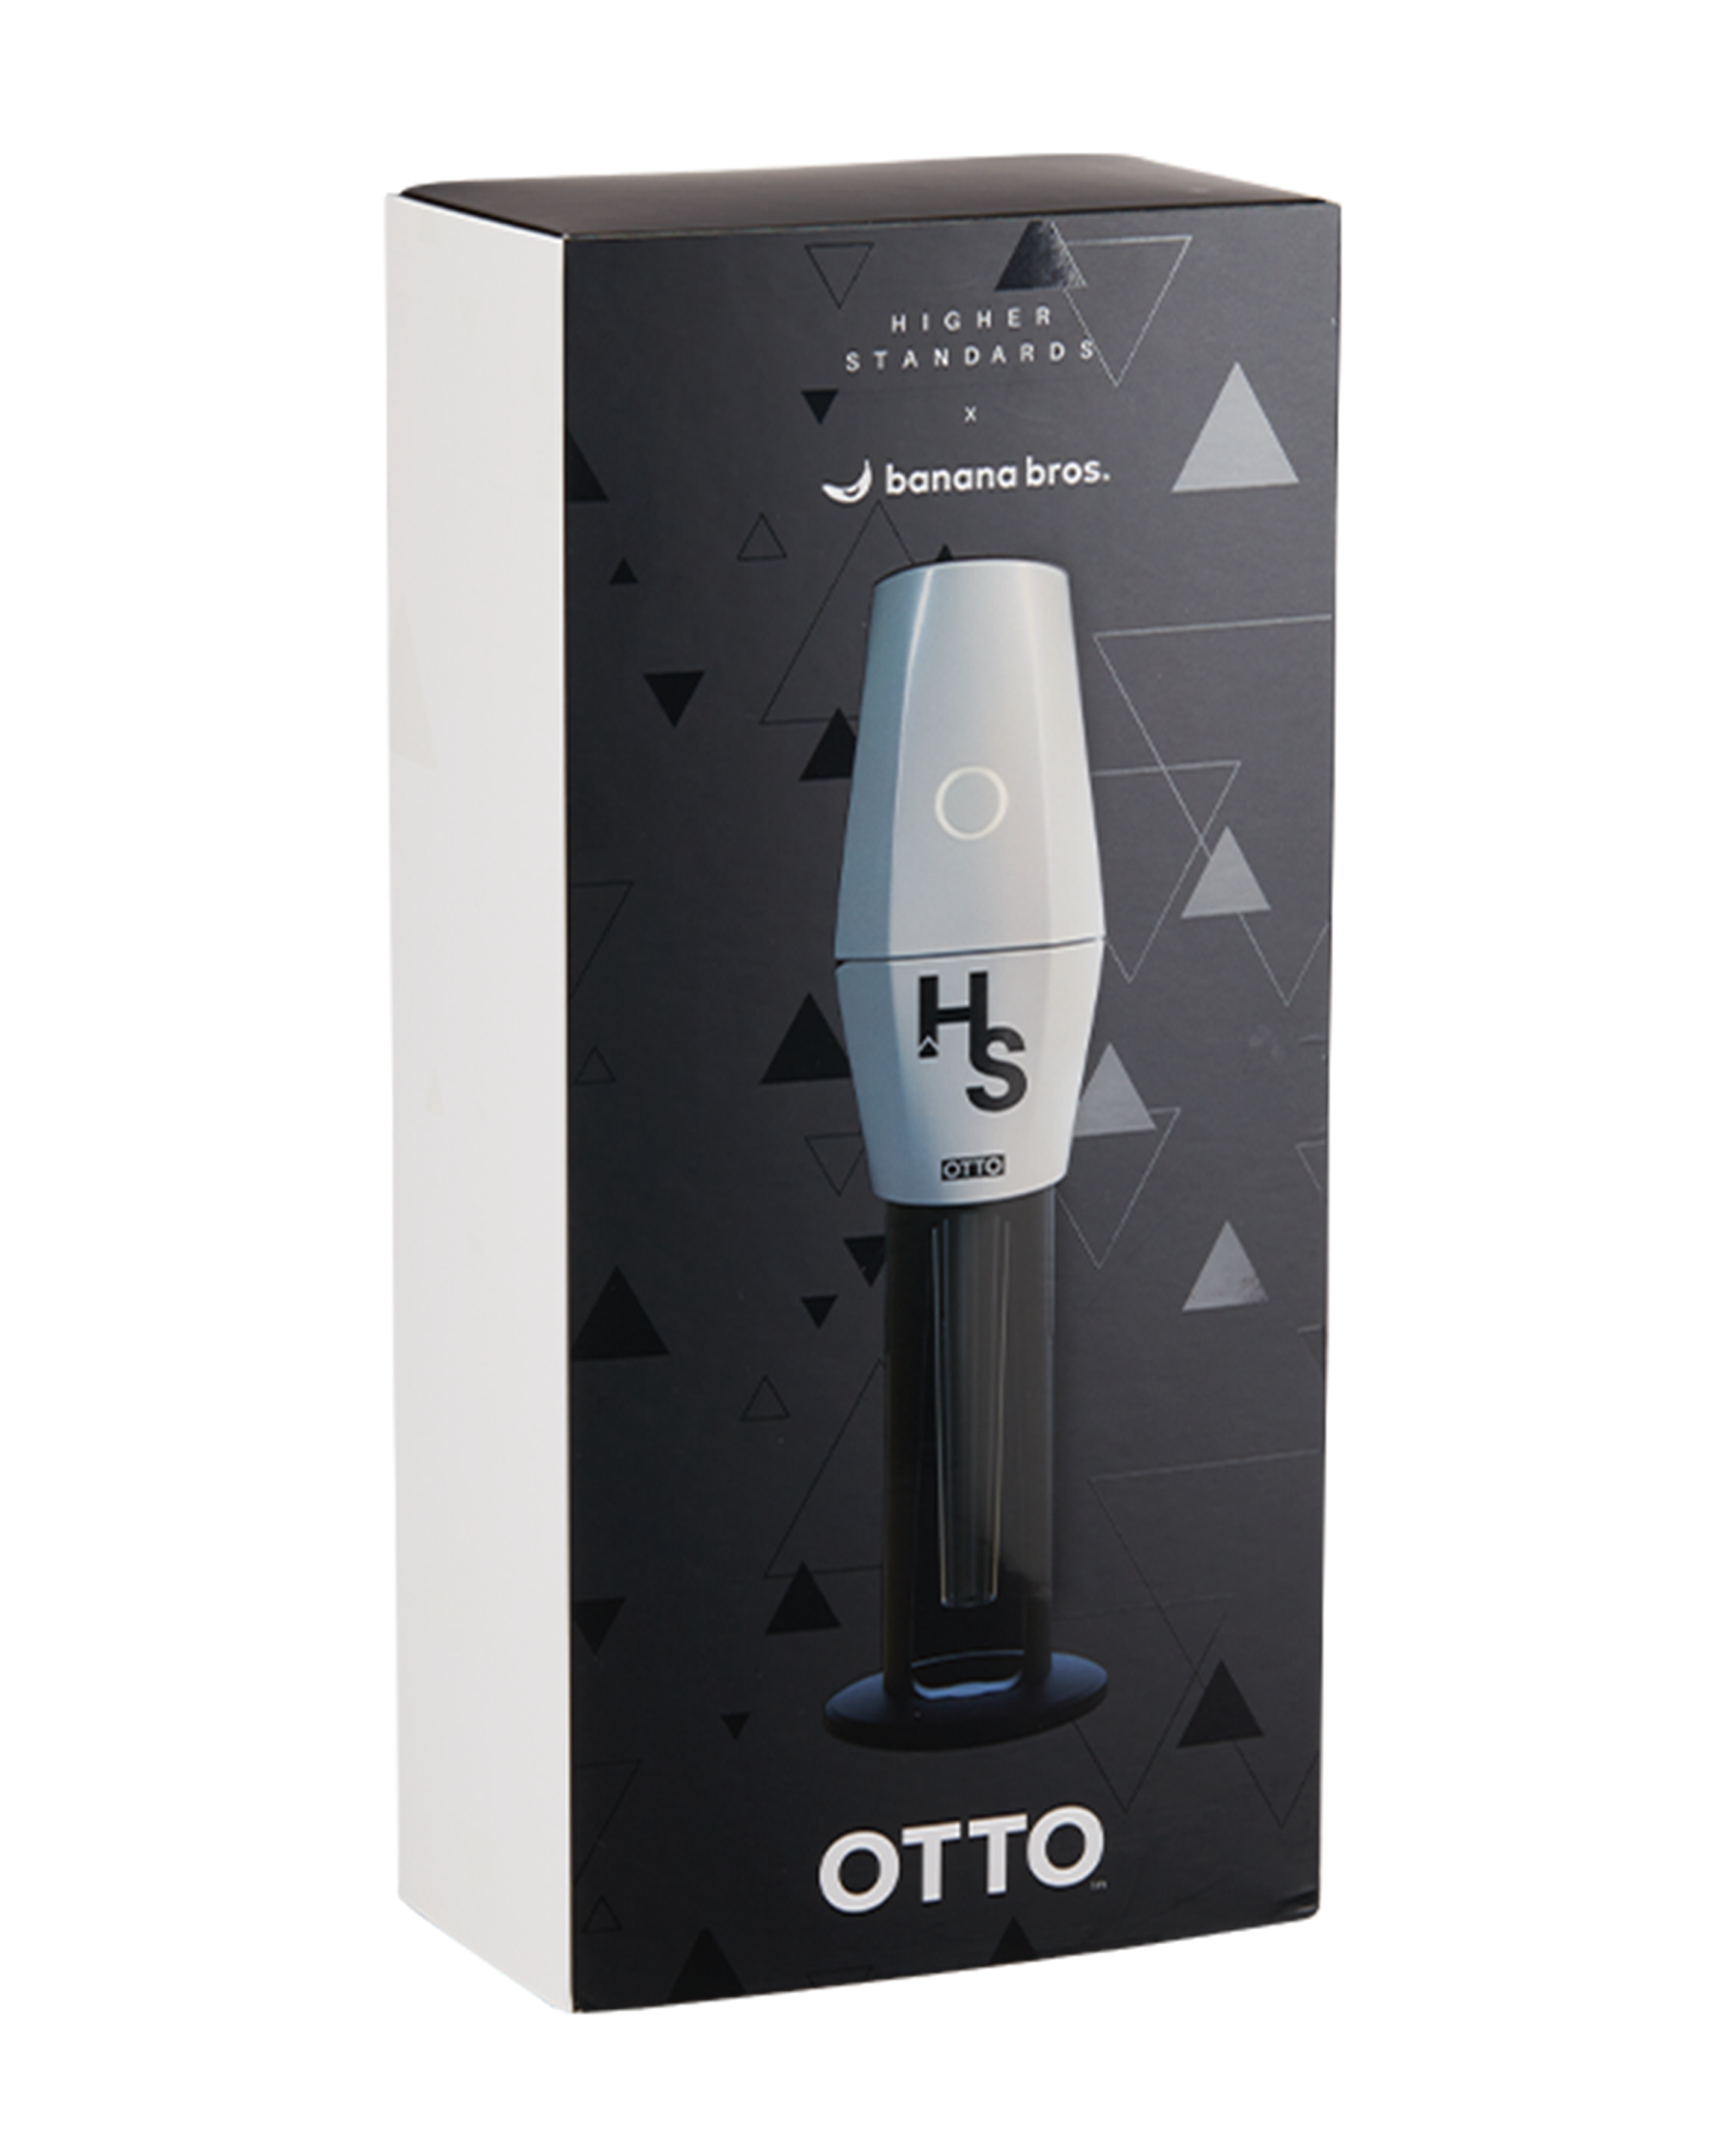 Higher Standards | Banana Bros. Otto Plastic Automatic Electric Grinder | 11.5in Tall - Button Activated - White